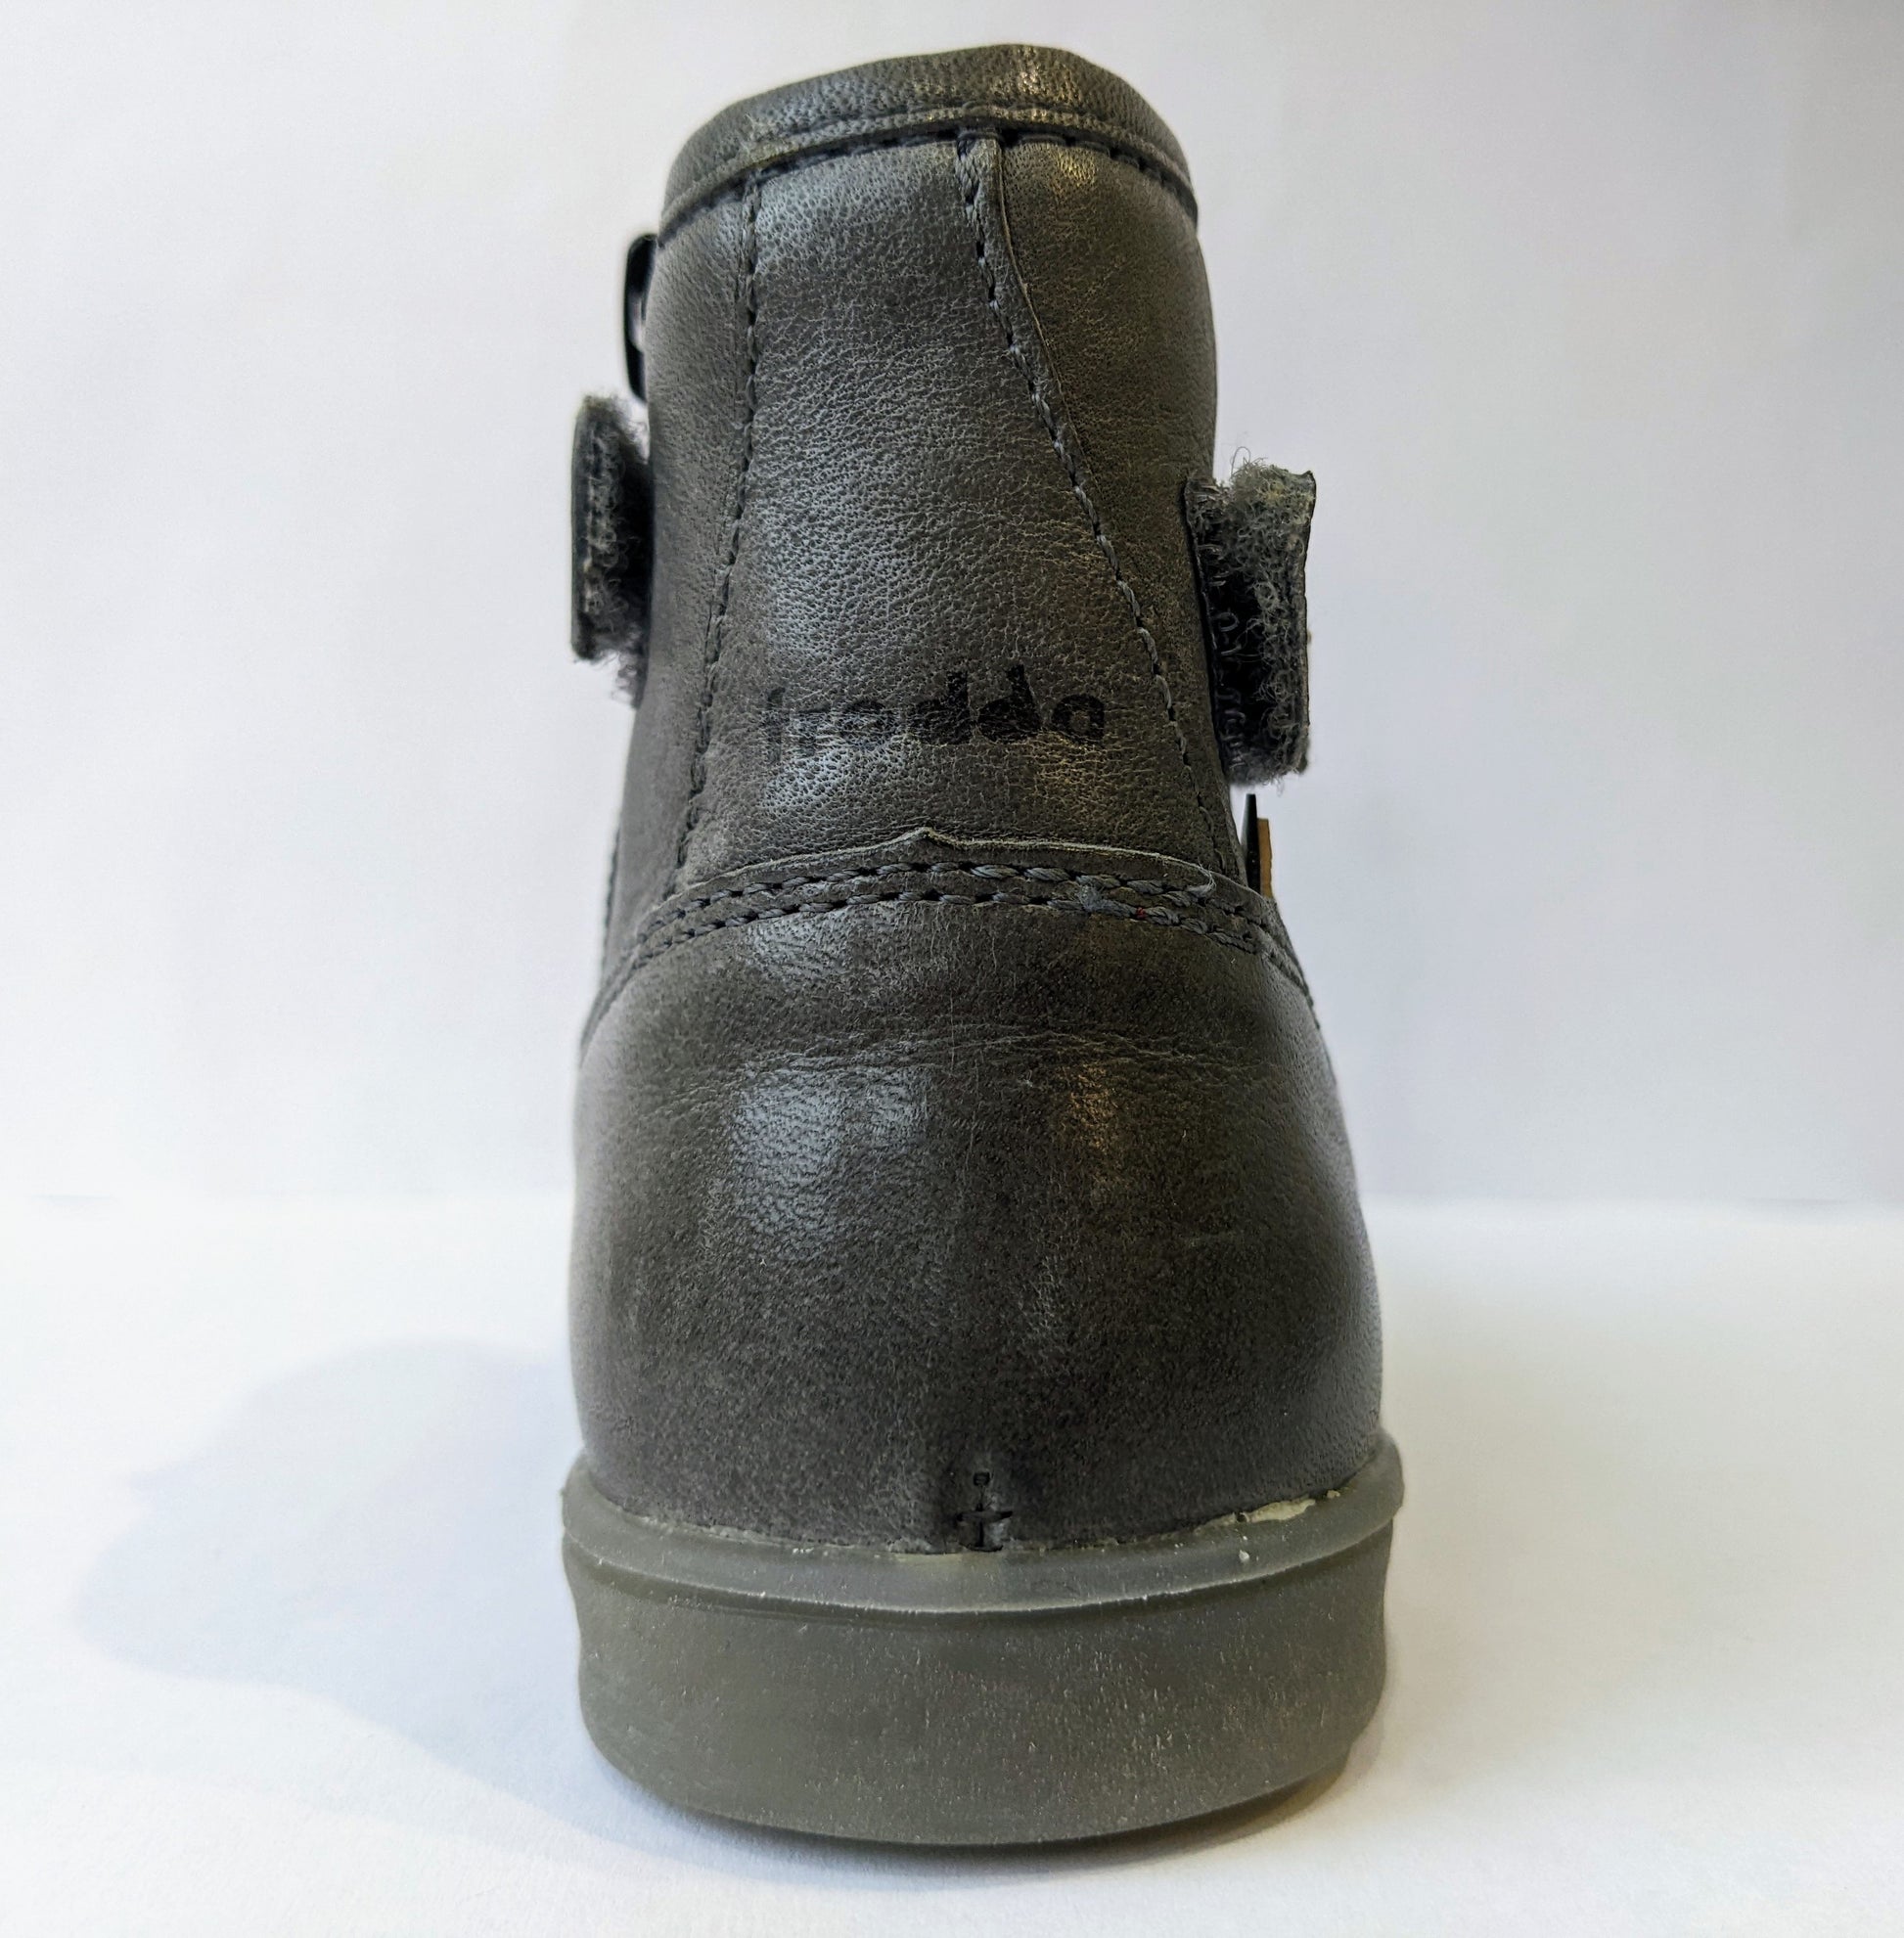 A boys waterproof ankle boot by Froddo, style G2160034-1 , in grey leather with toe bumper. Back view.